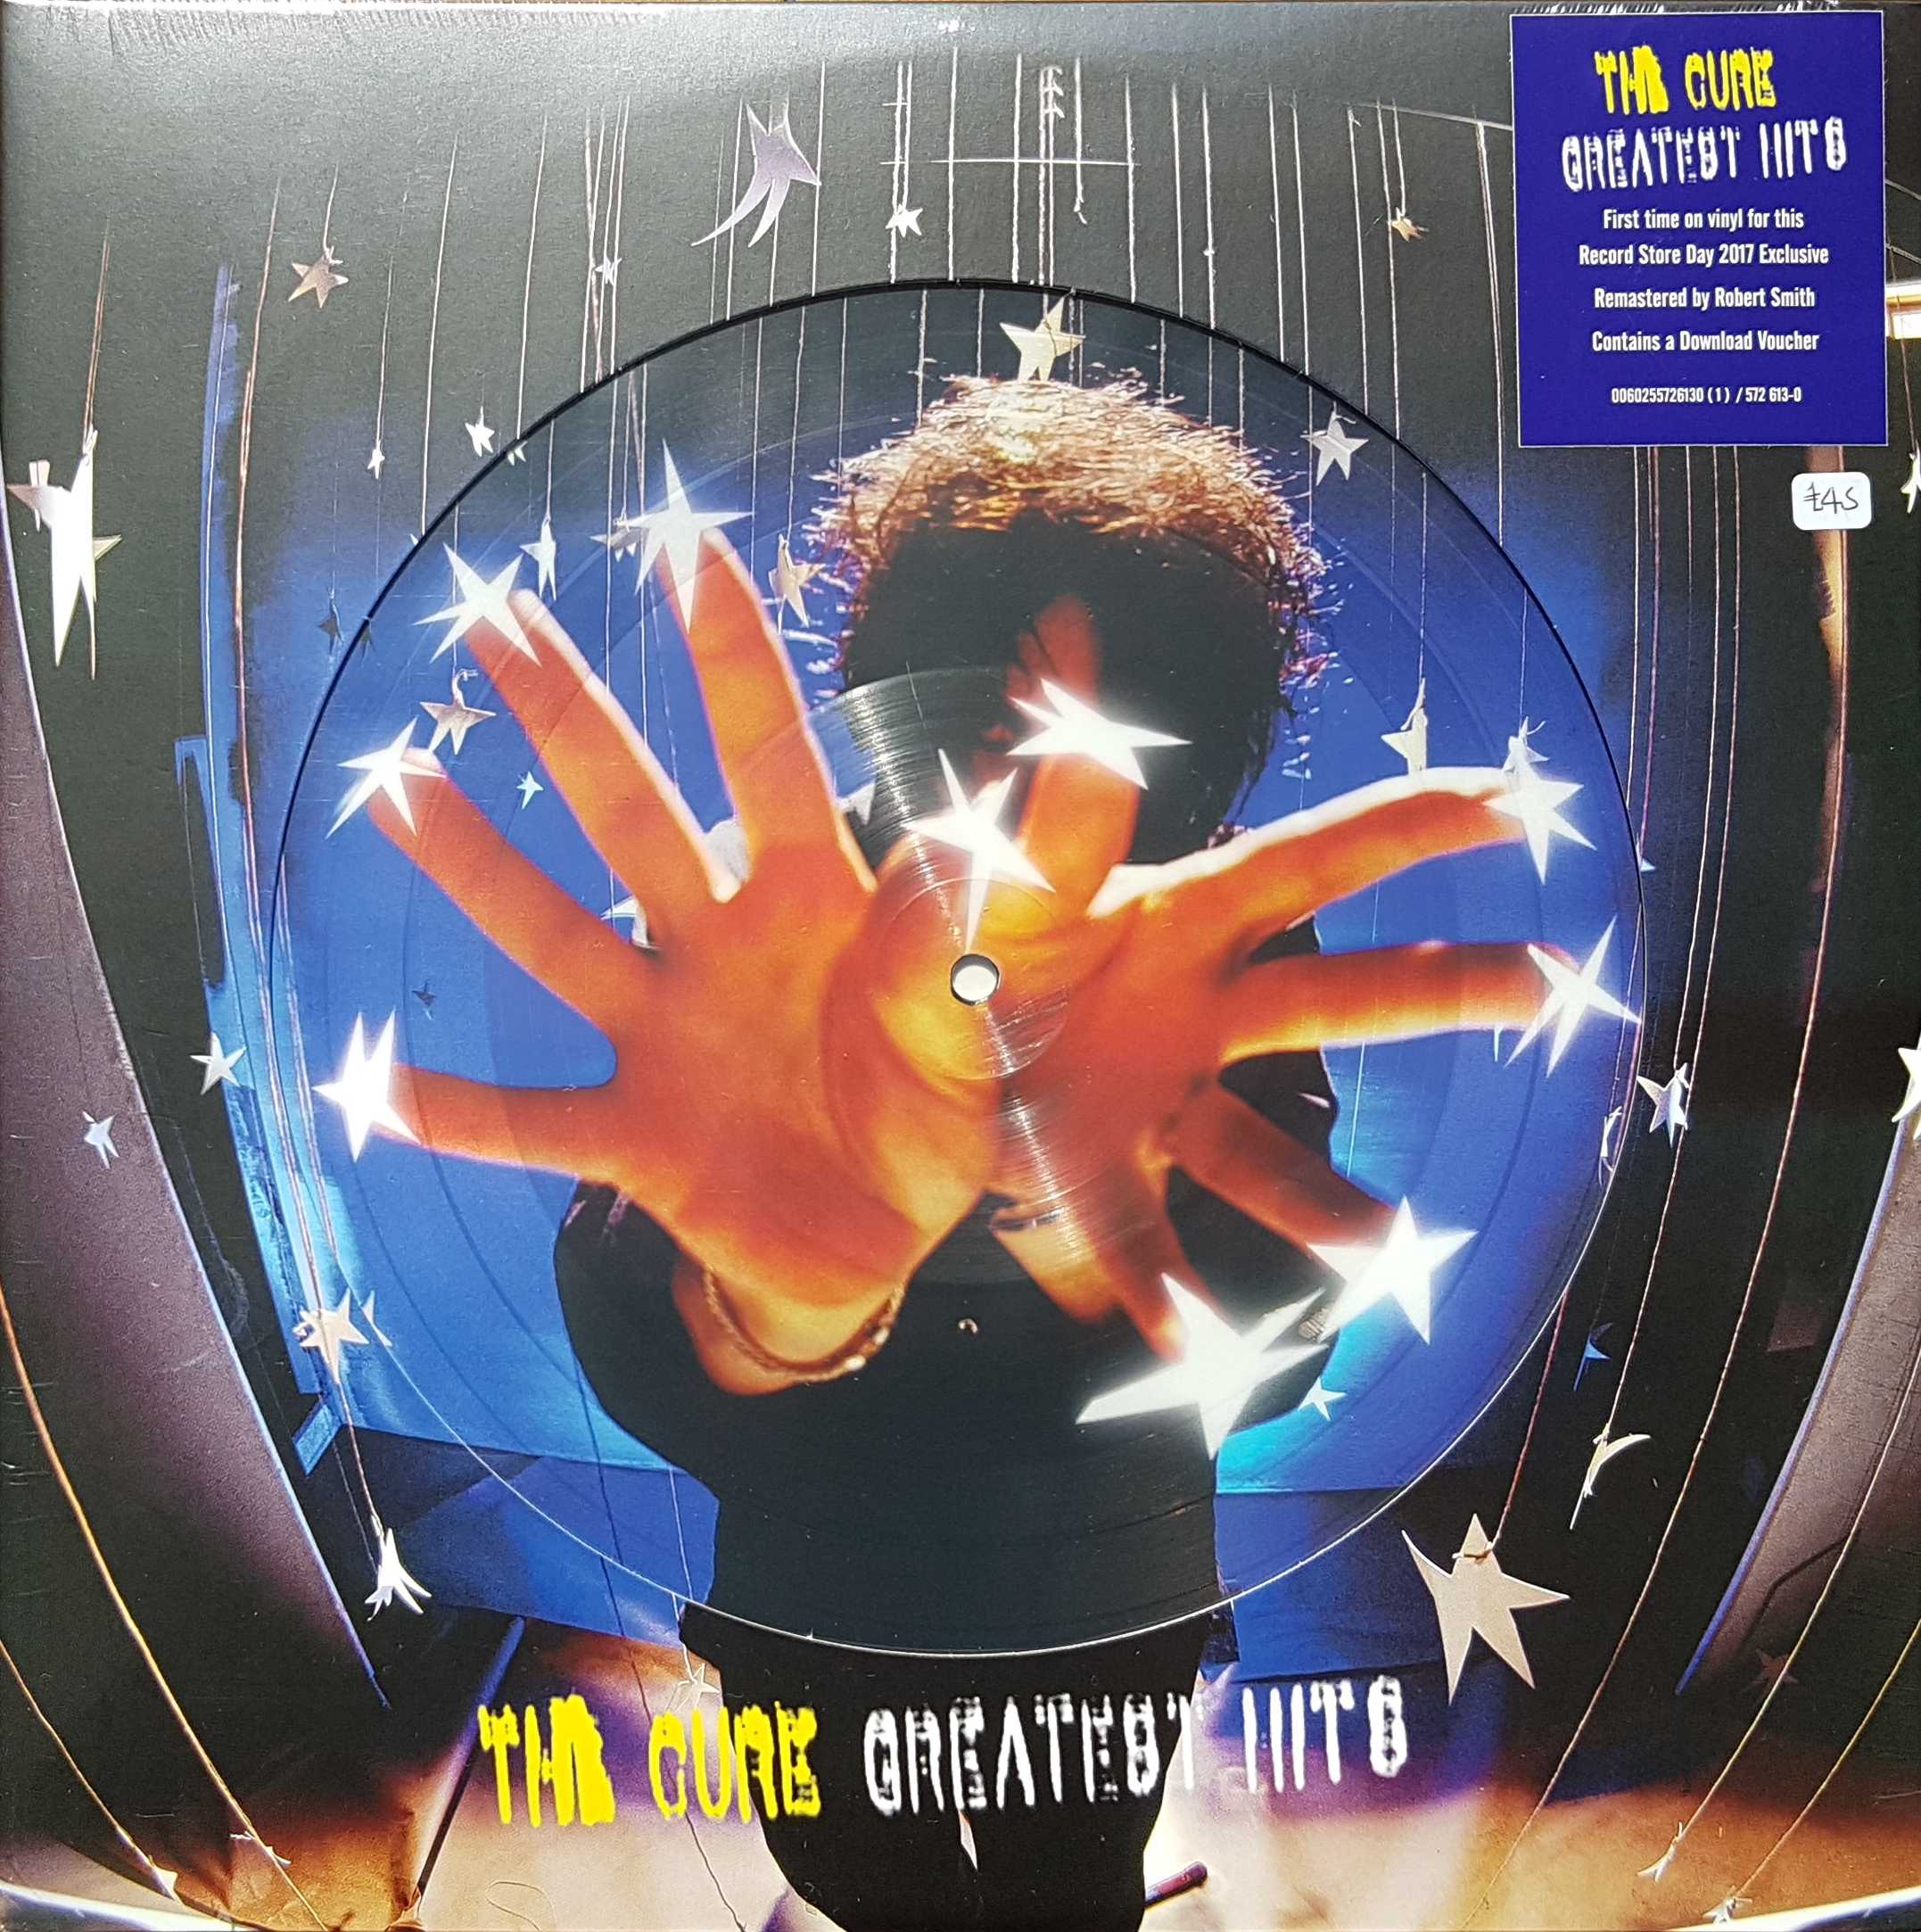 Picture of 572613 - 0 Greatest hits - Limited edition picture discs - Record Store Day 2017 by artist The Cure 